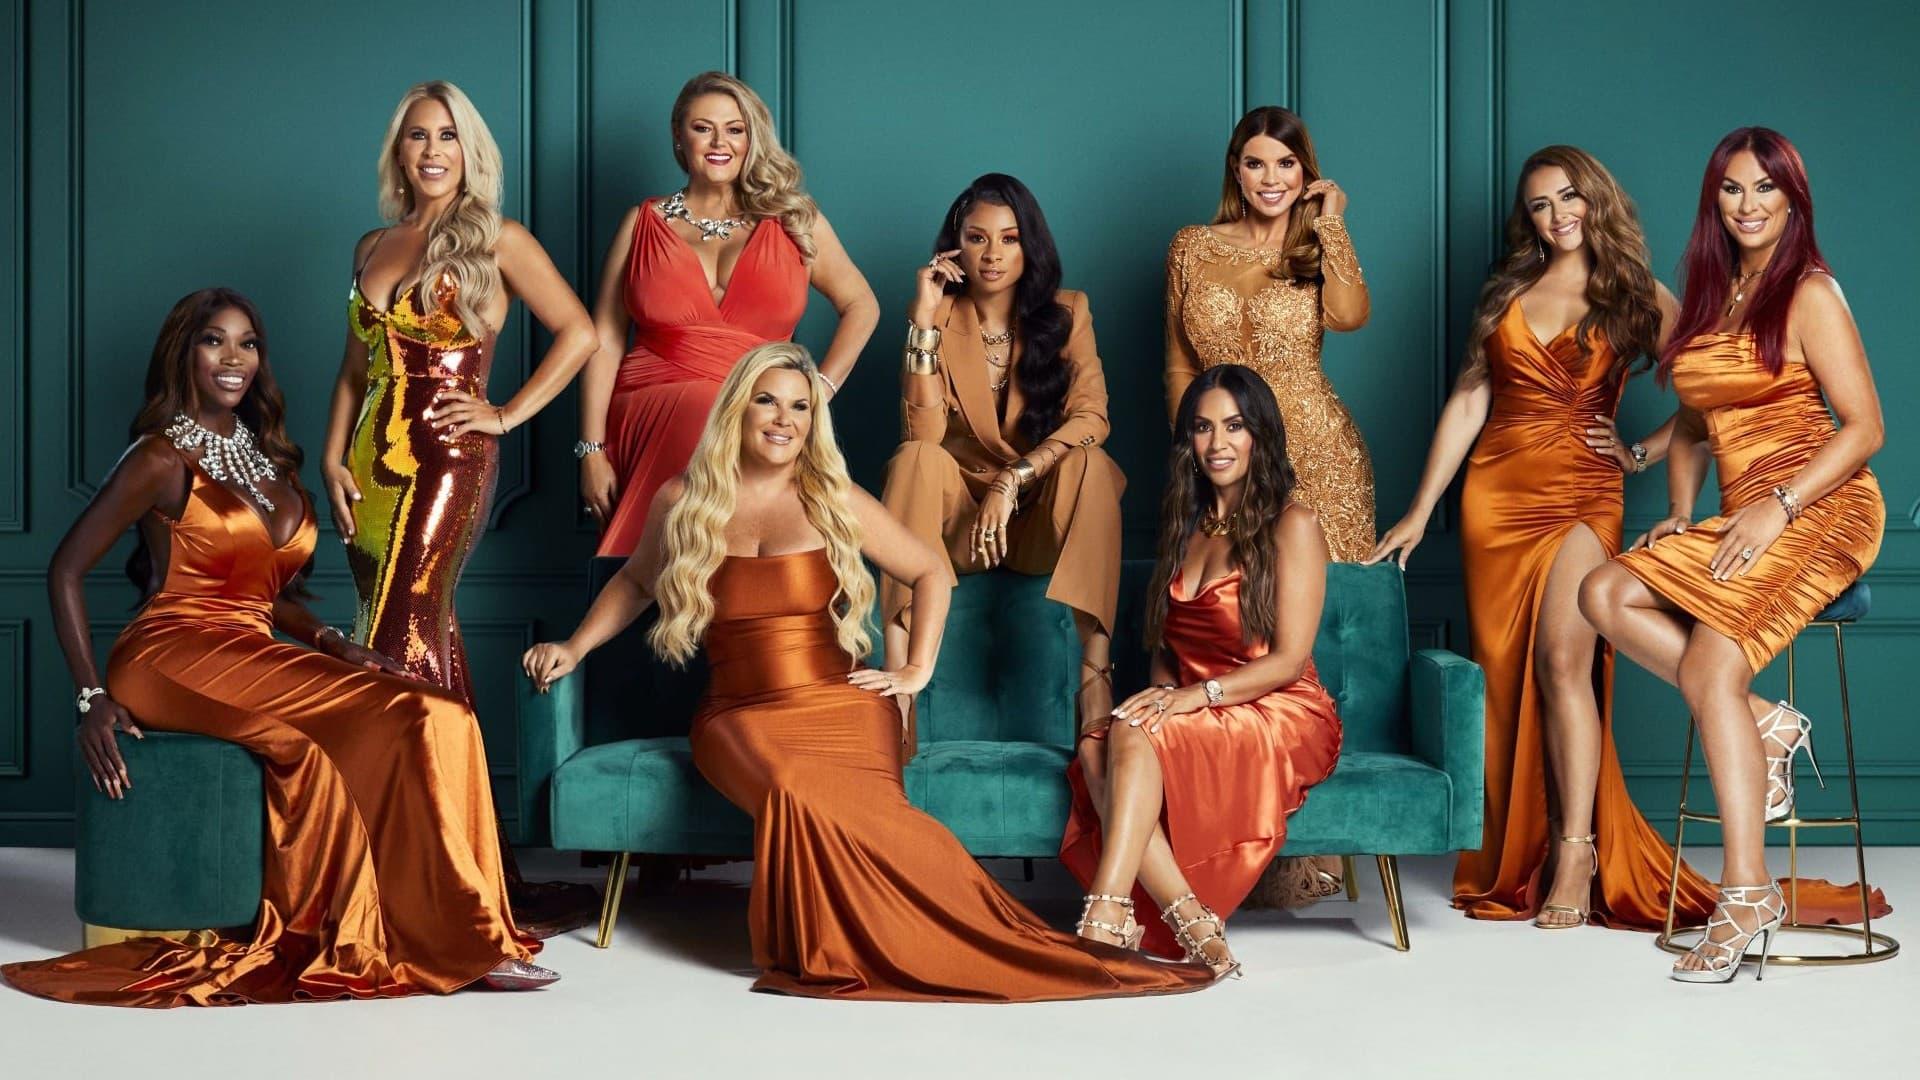 The Real Housewives of Cheshire backdrop